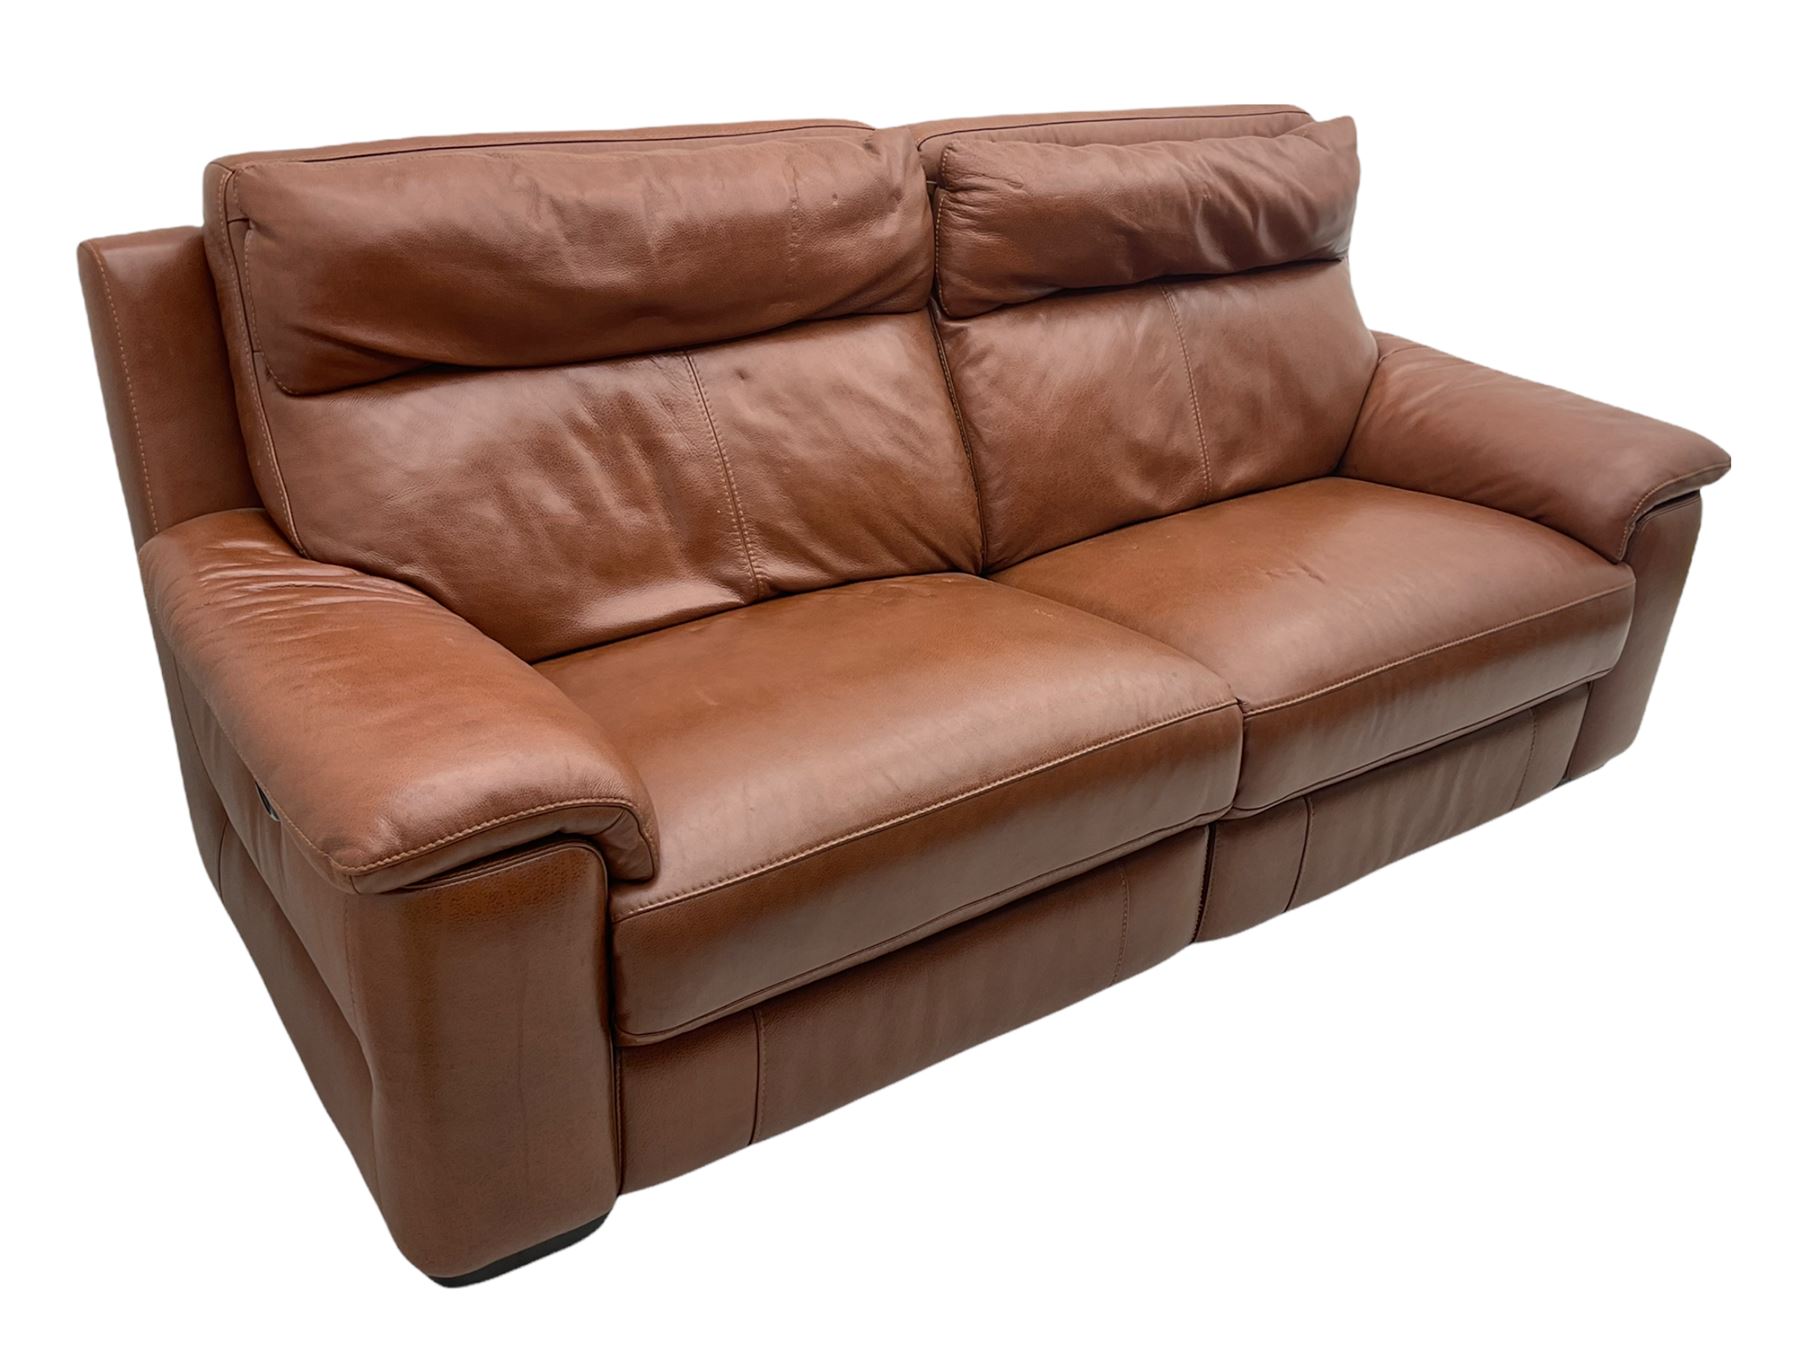 Three electric reclining sofa upholstered in tan leather - Image 5 of 23